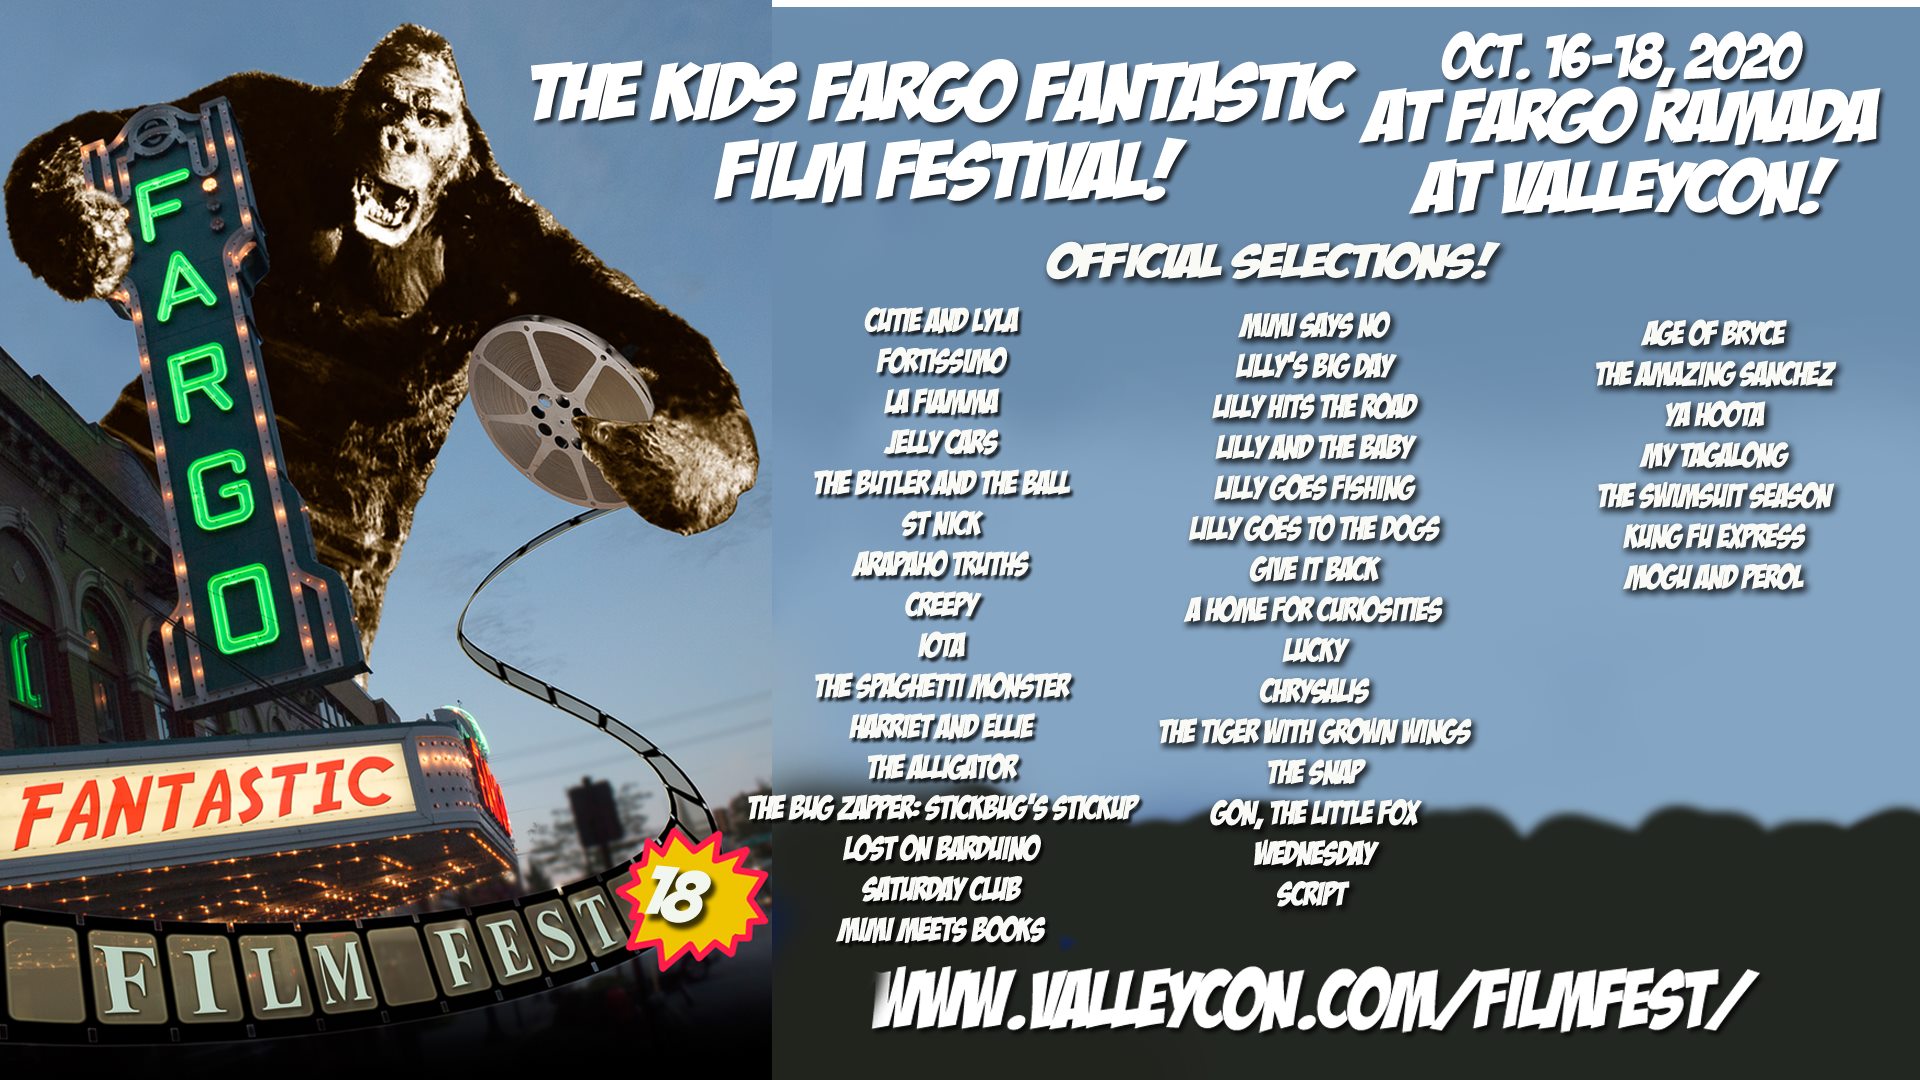 Fargo-Moorhead KIDS Fantastic Film Festival Selects THE BUTLER AND THE BALL